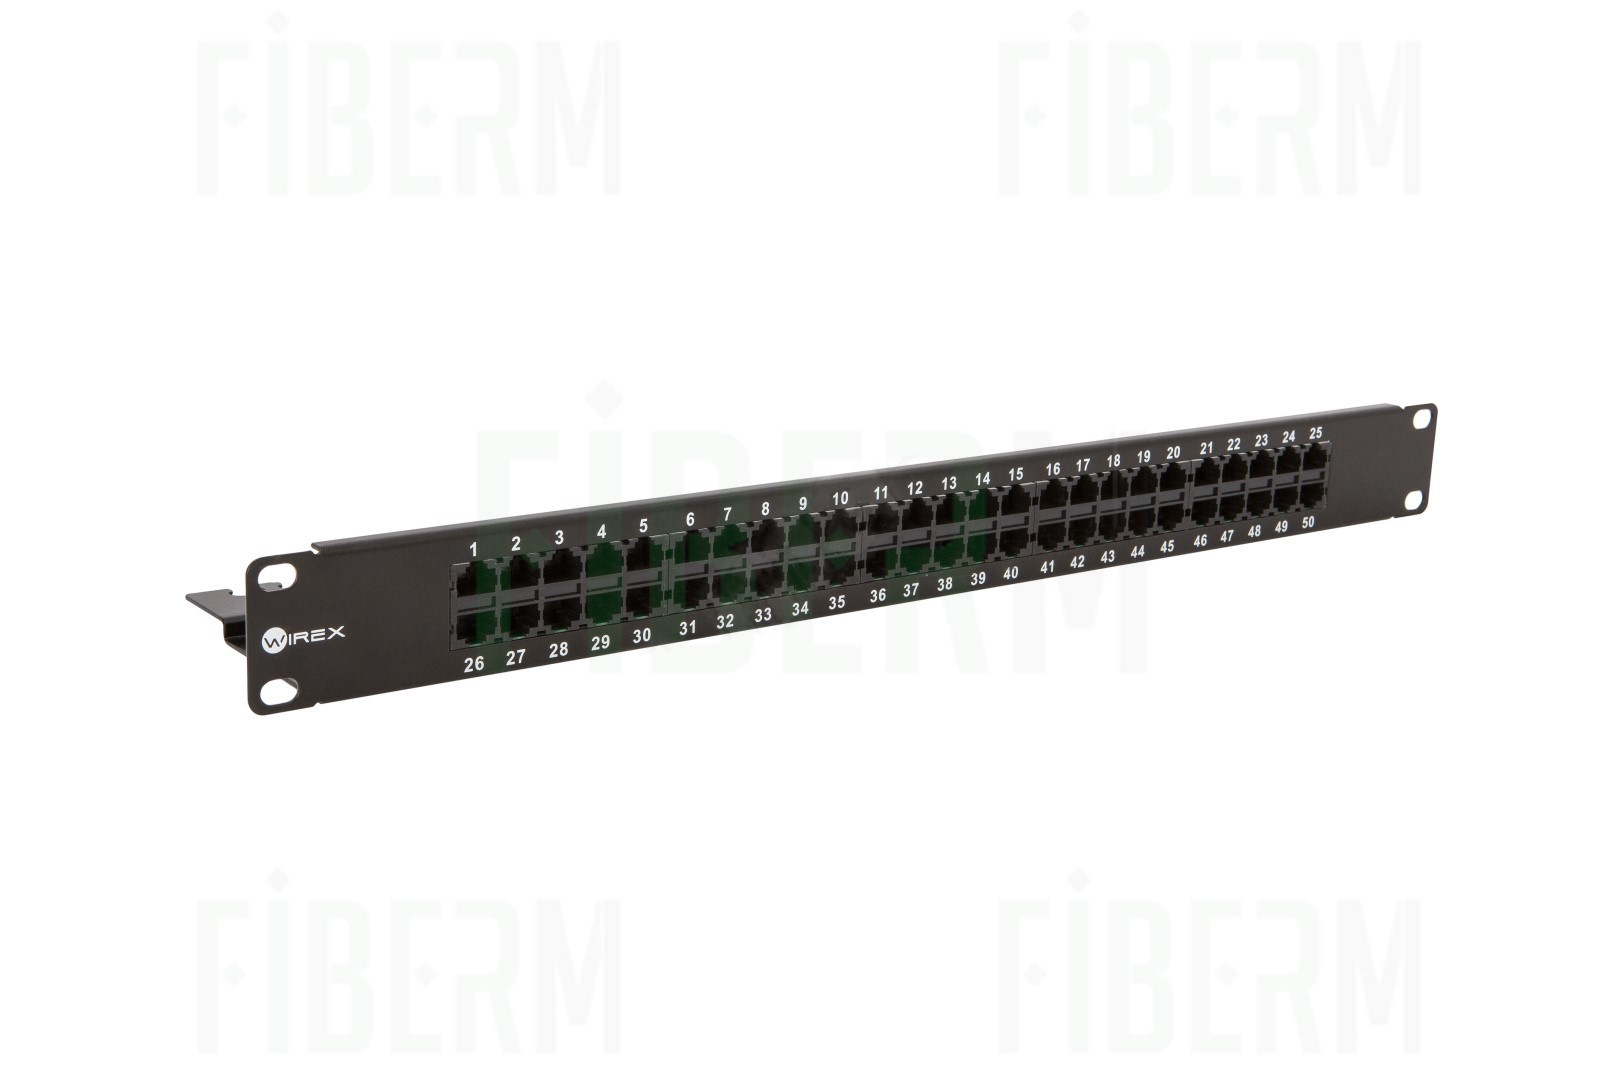 WIREX ISDN Patch Panel 50x RJ45 1U with clamping strip WPP-ISDN-50-1-BL